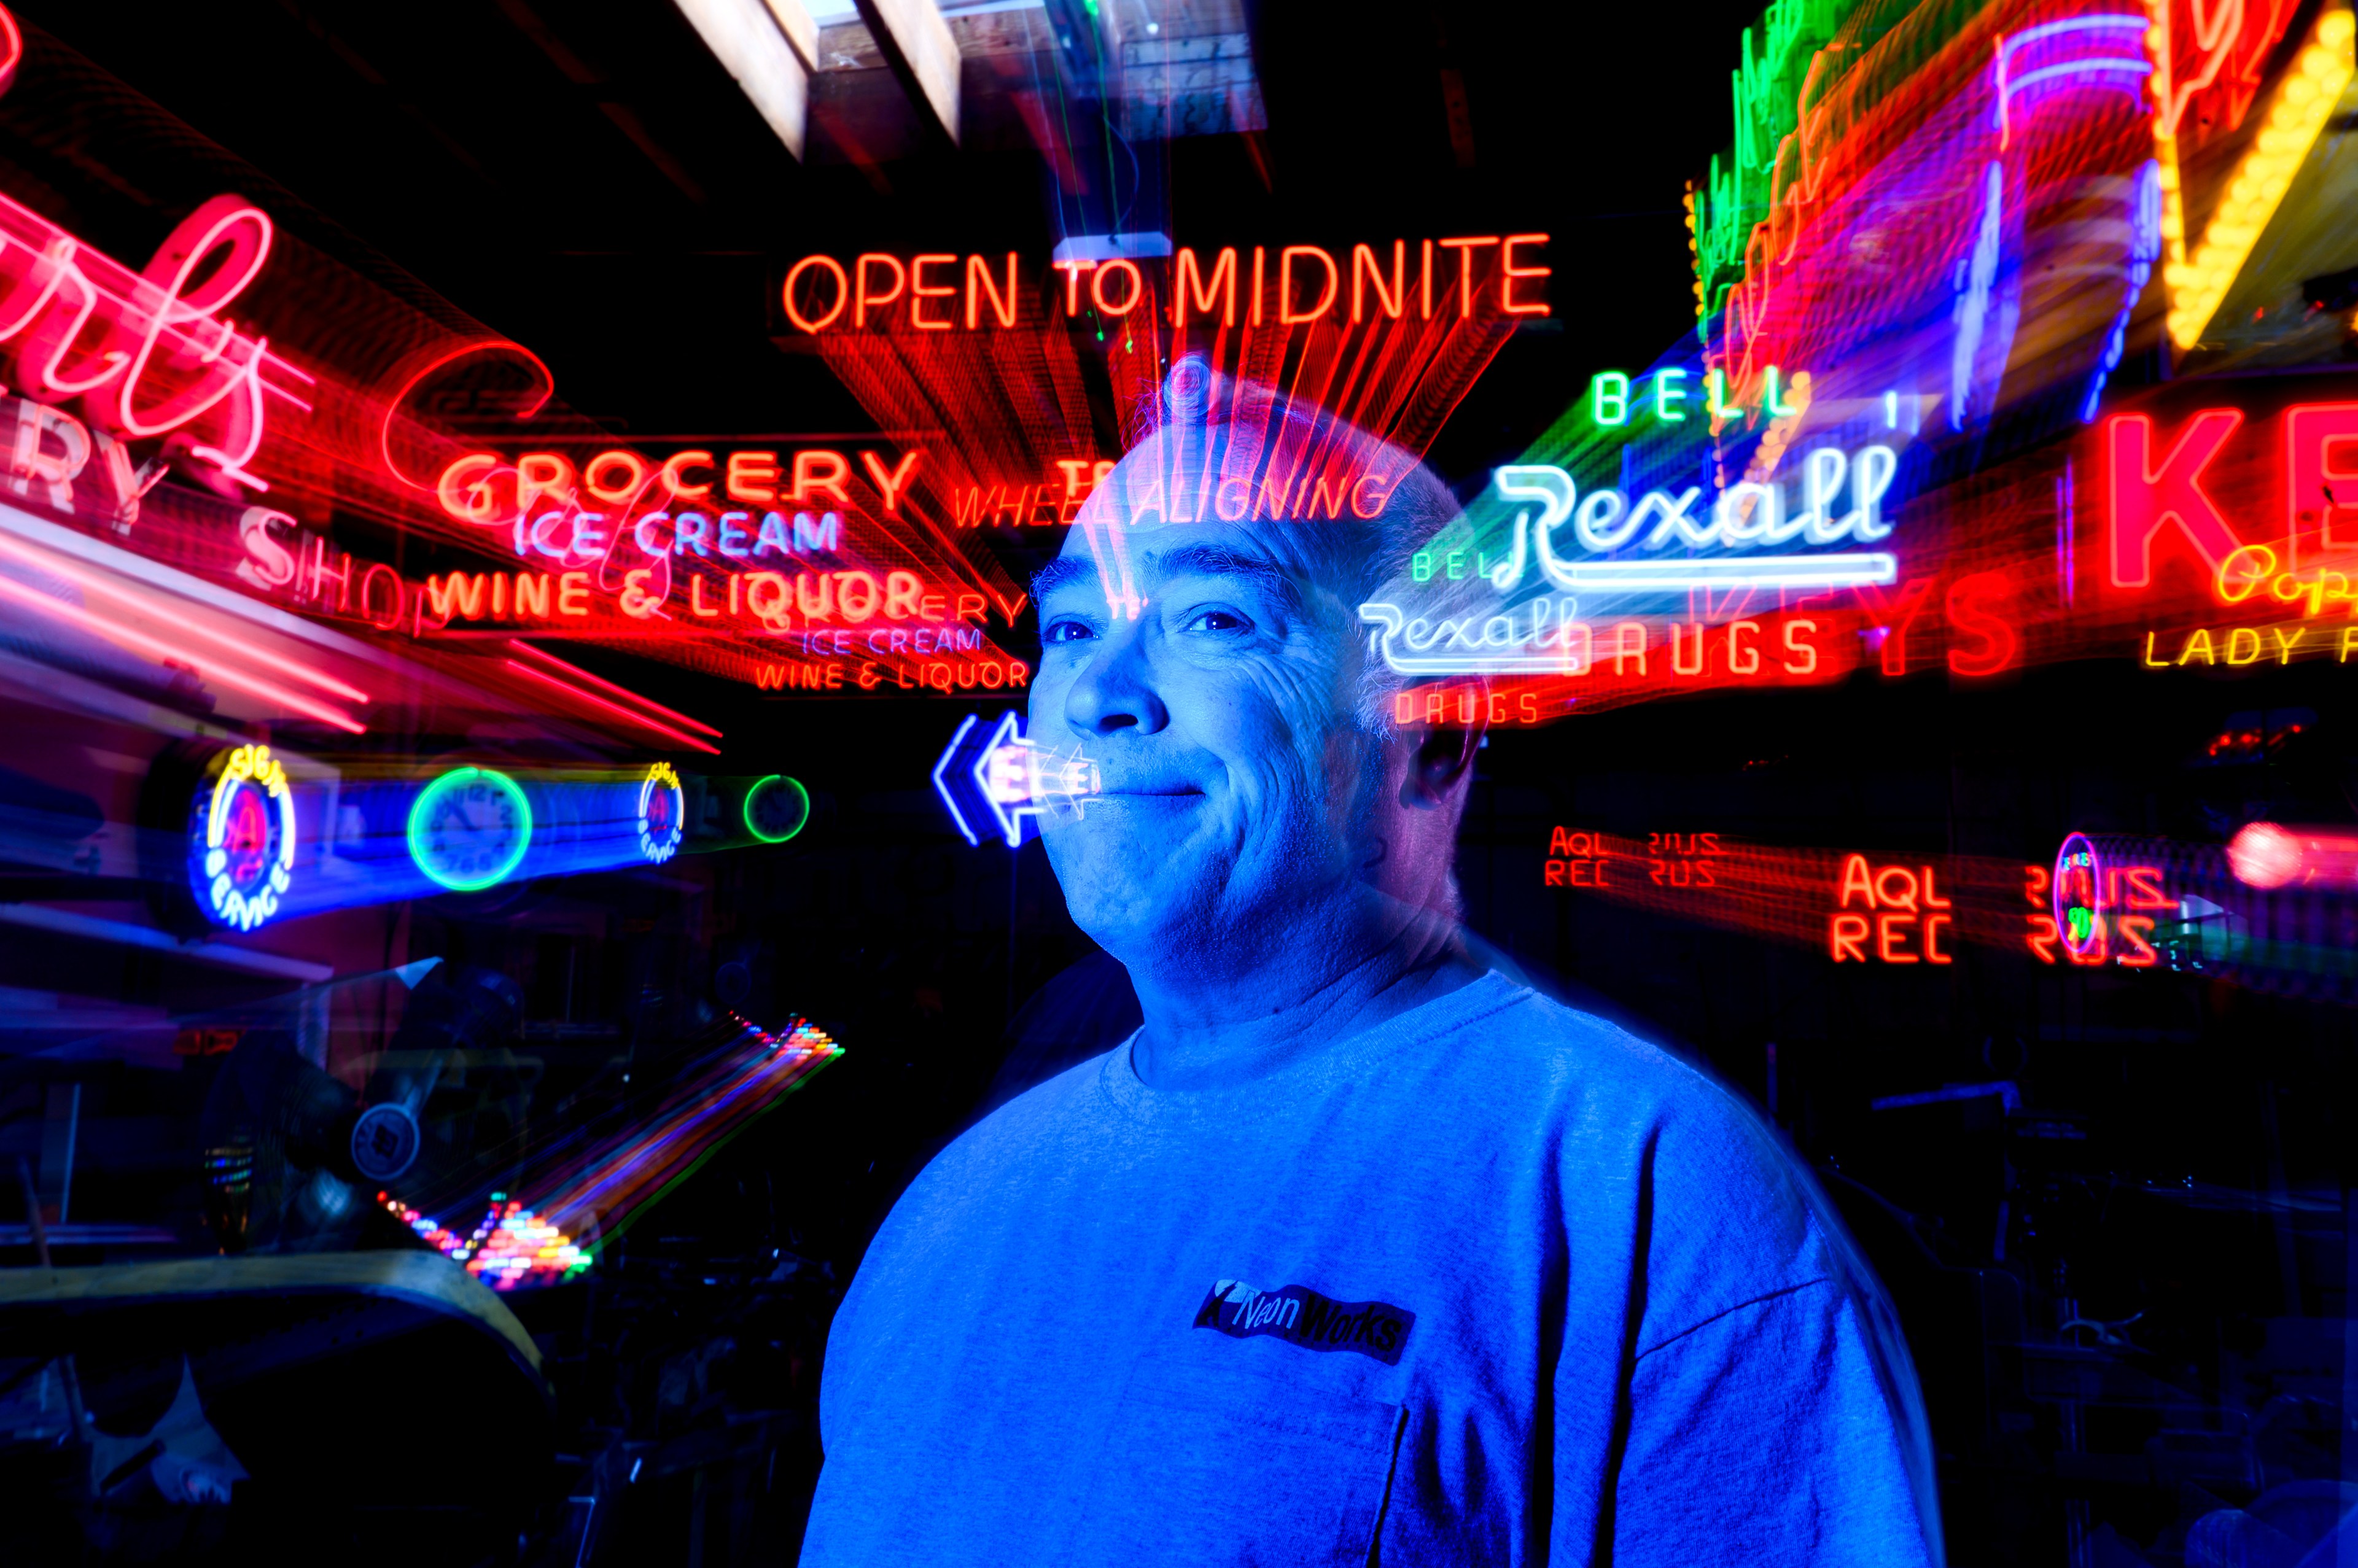 A moody portrait of a man with blue light reflected on him with a variety of fast moving neon signs in the background.